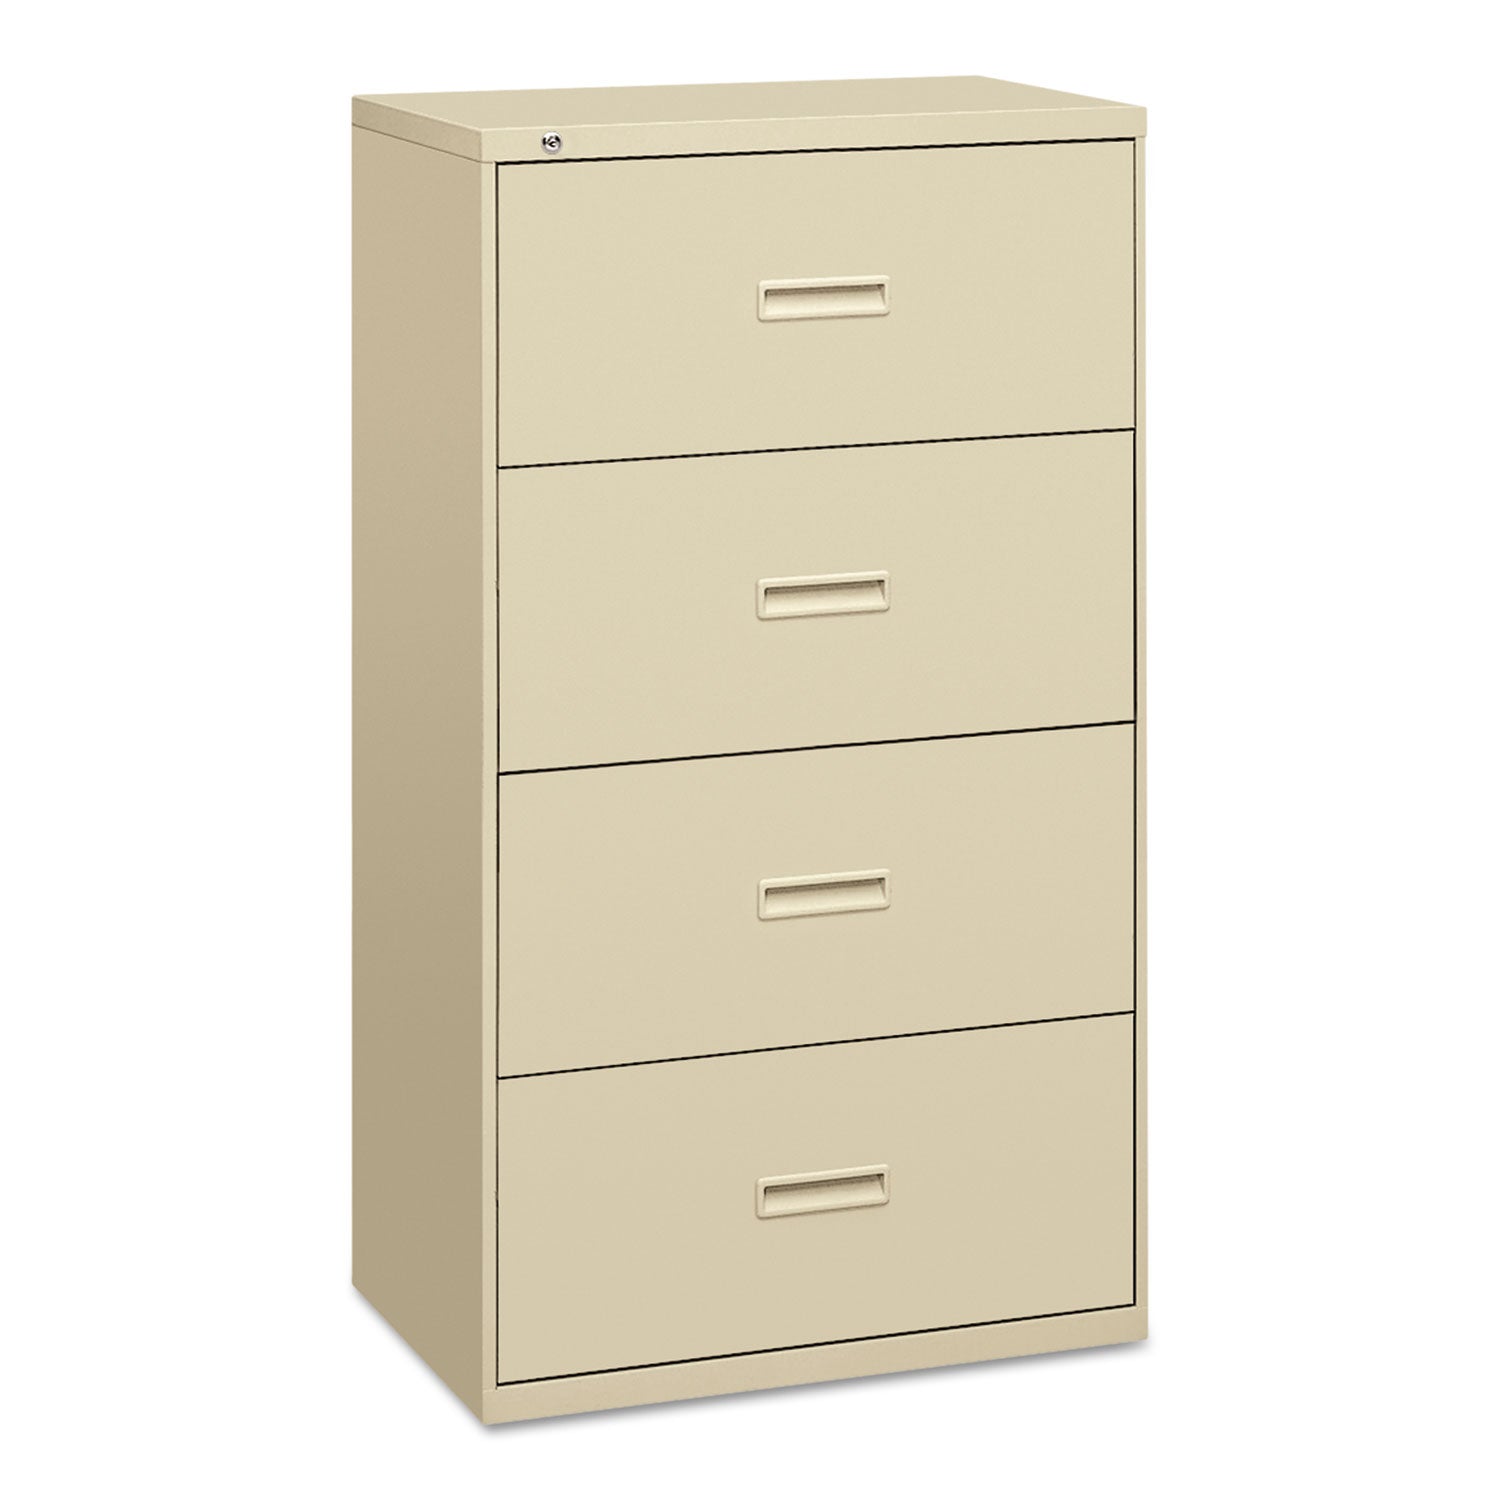 400 Series Lateral File, 4 Legal/Letter-Size File Drawers, Putty, 30" x 18" x 52.5 - 